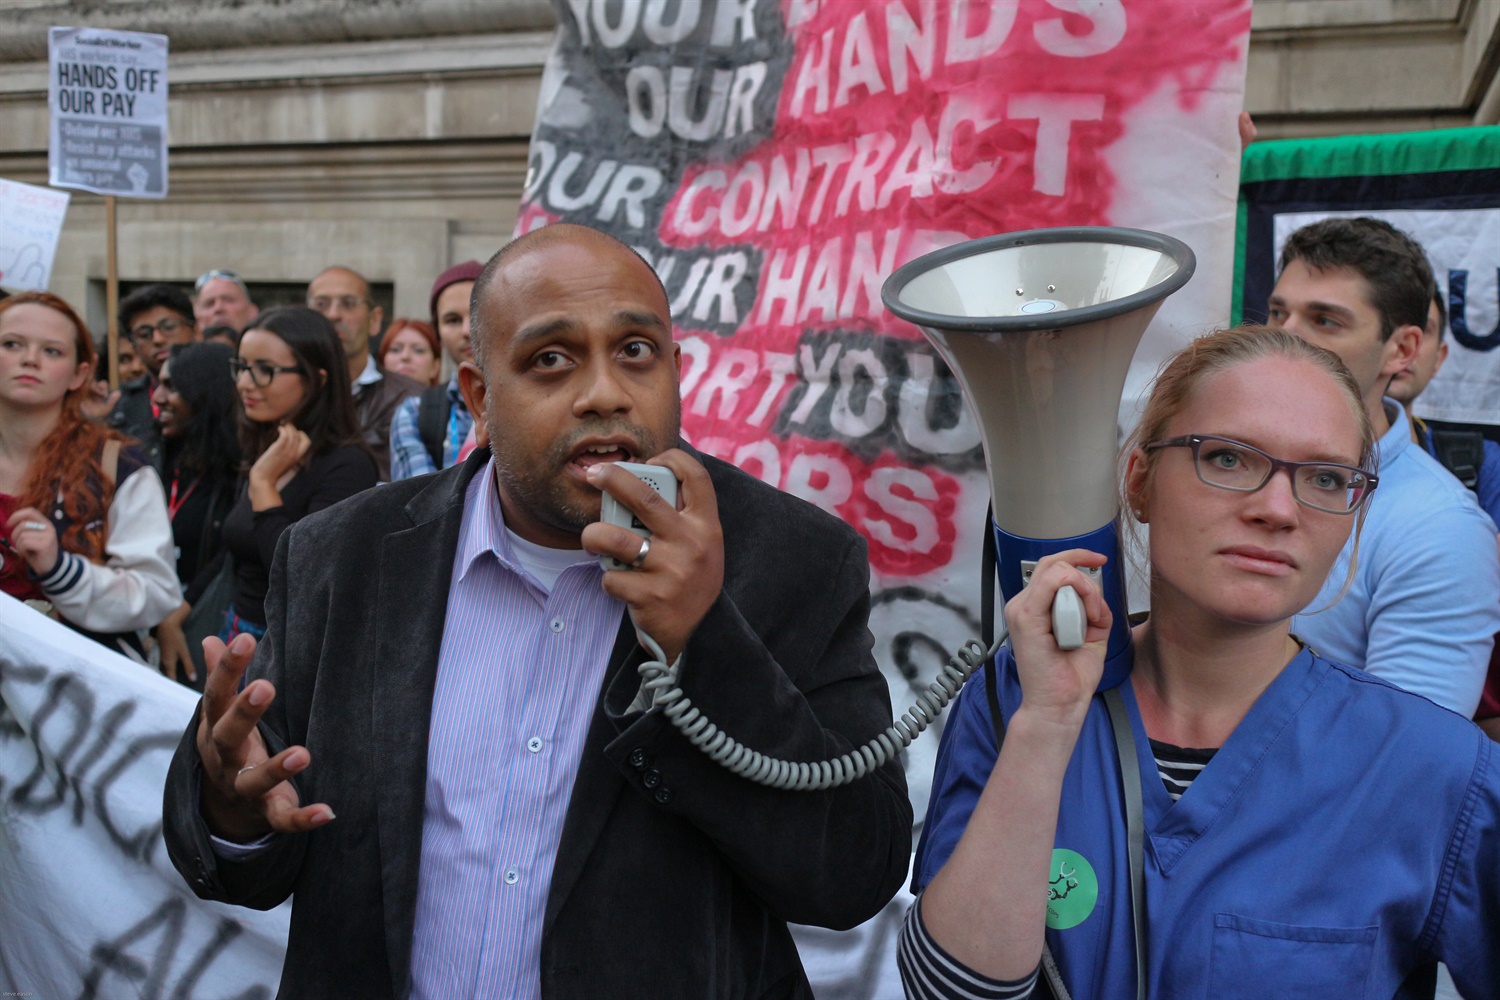 Not Safe - Not fair protest by doctors, junior doctors and medical students in central London 28th September 2015  8. c. Steve Eason